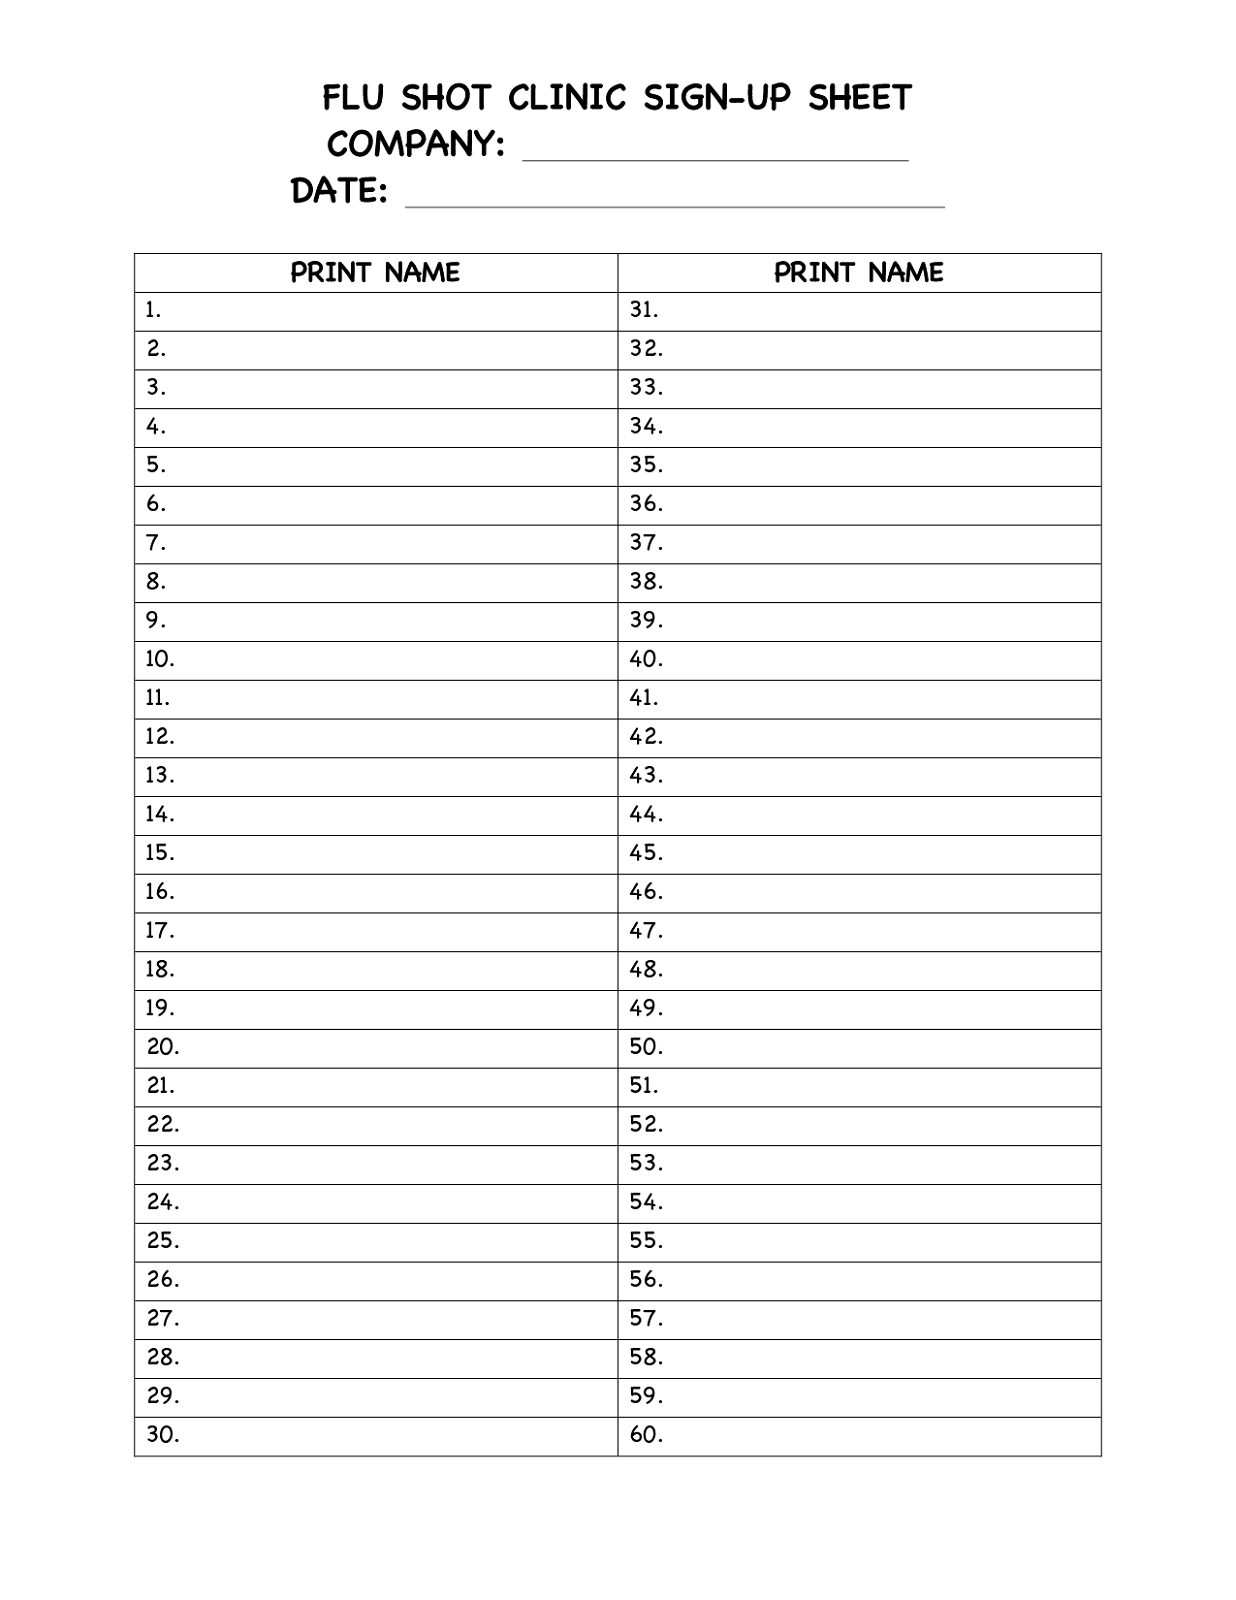 Potluck Sign Up Sheet Word For Events | Loving Printable Regarding Potluck Signup Sheet Template Word